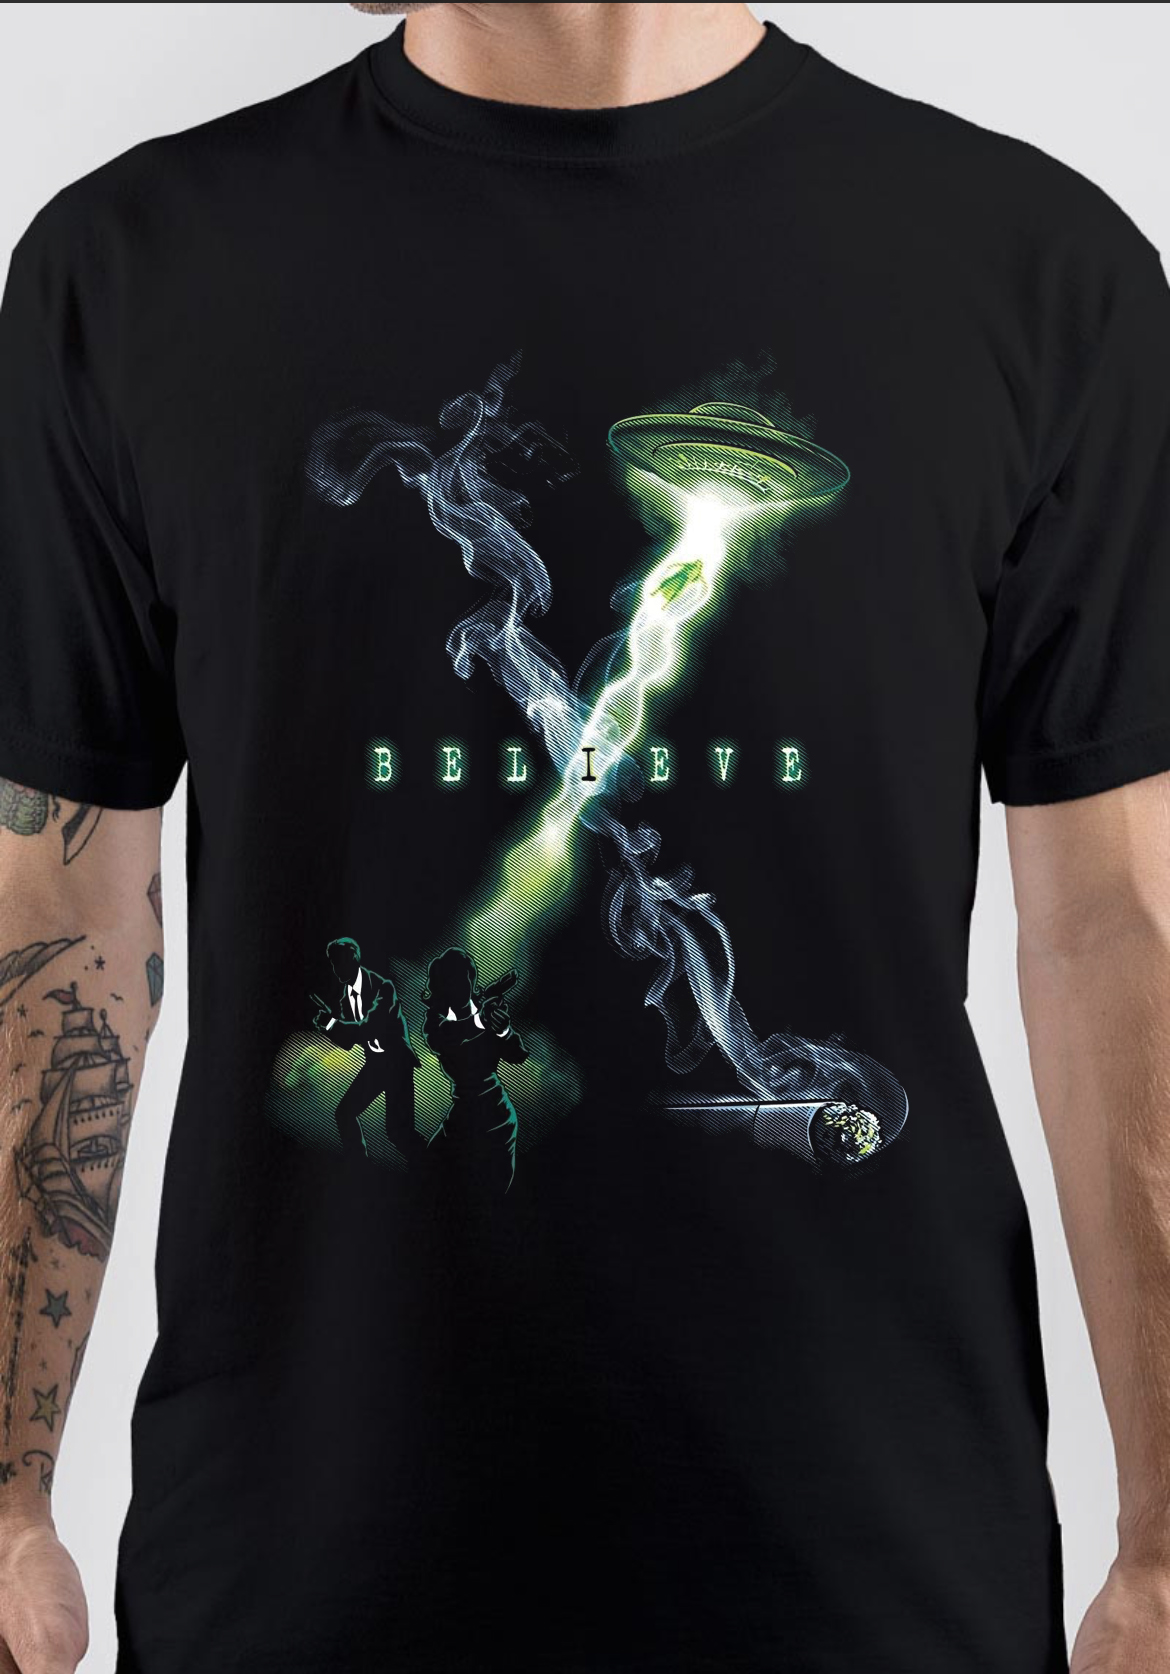 Ghost Files T-Shirt And Merchandise